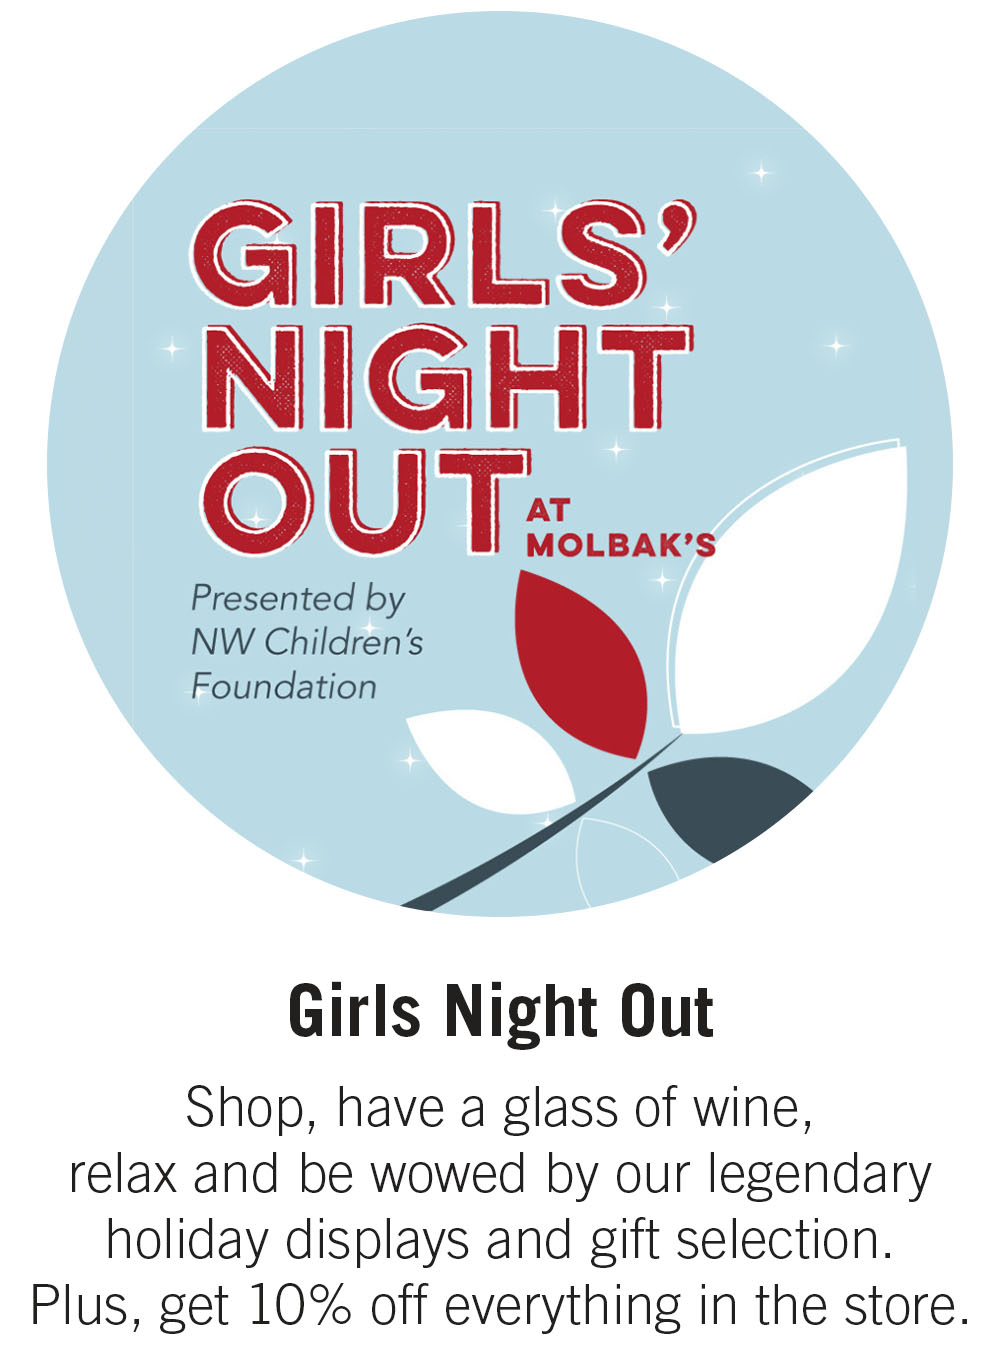 Girls Night Out Shop, have a glass of wine, relax and be wowed by our legendary holiday displays and gift selection.  Plus, get 10% off everything in the store.